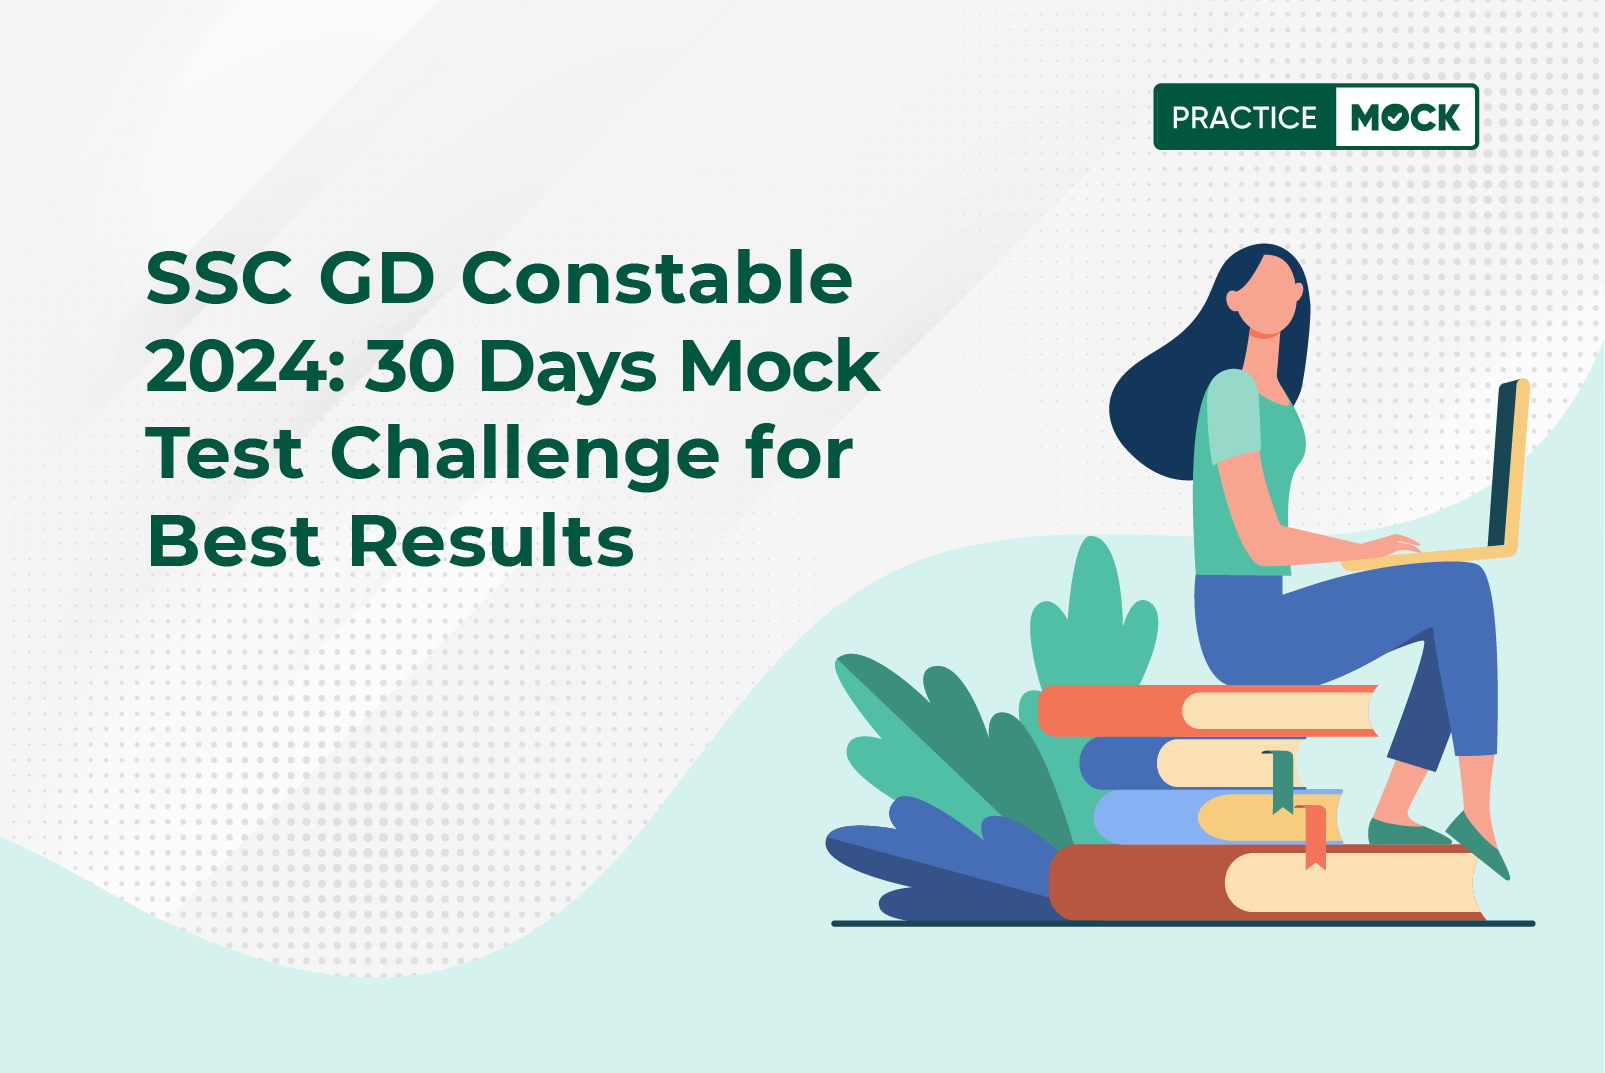 SSC GD Constable 2024: 30 Days Mock Test Challenge for Best Results